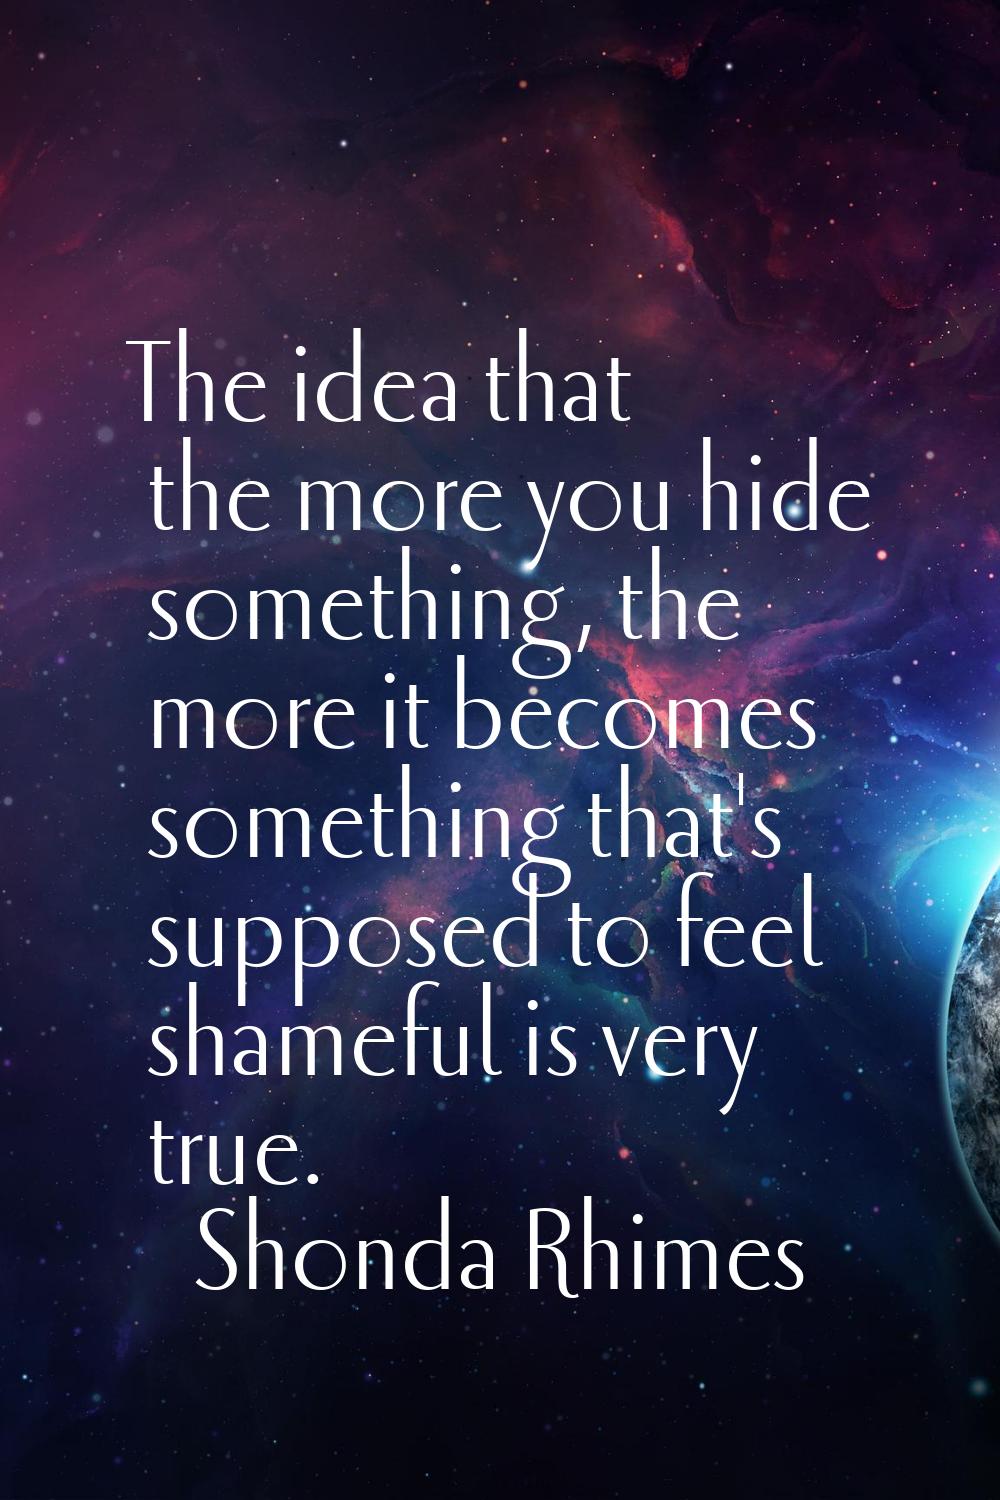 The idea that the more you hide something, the more it becomes something that's supposed to feel sh